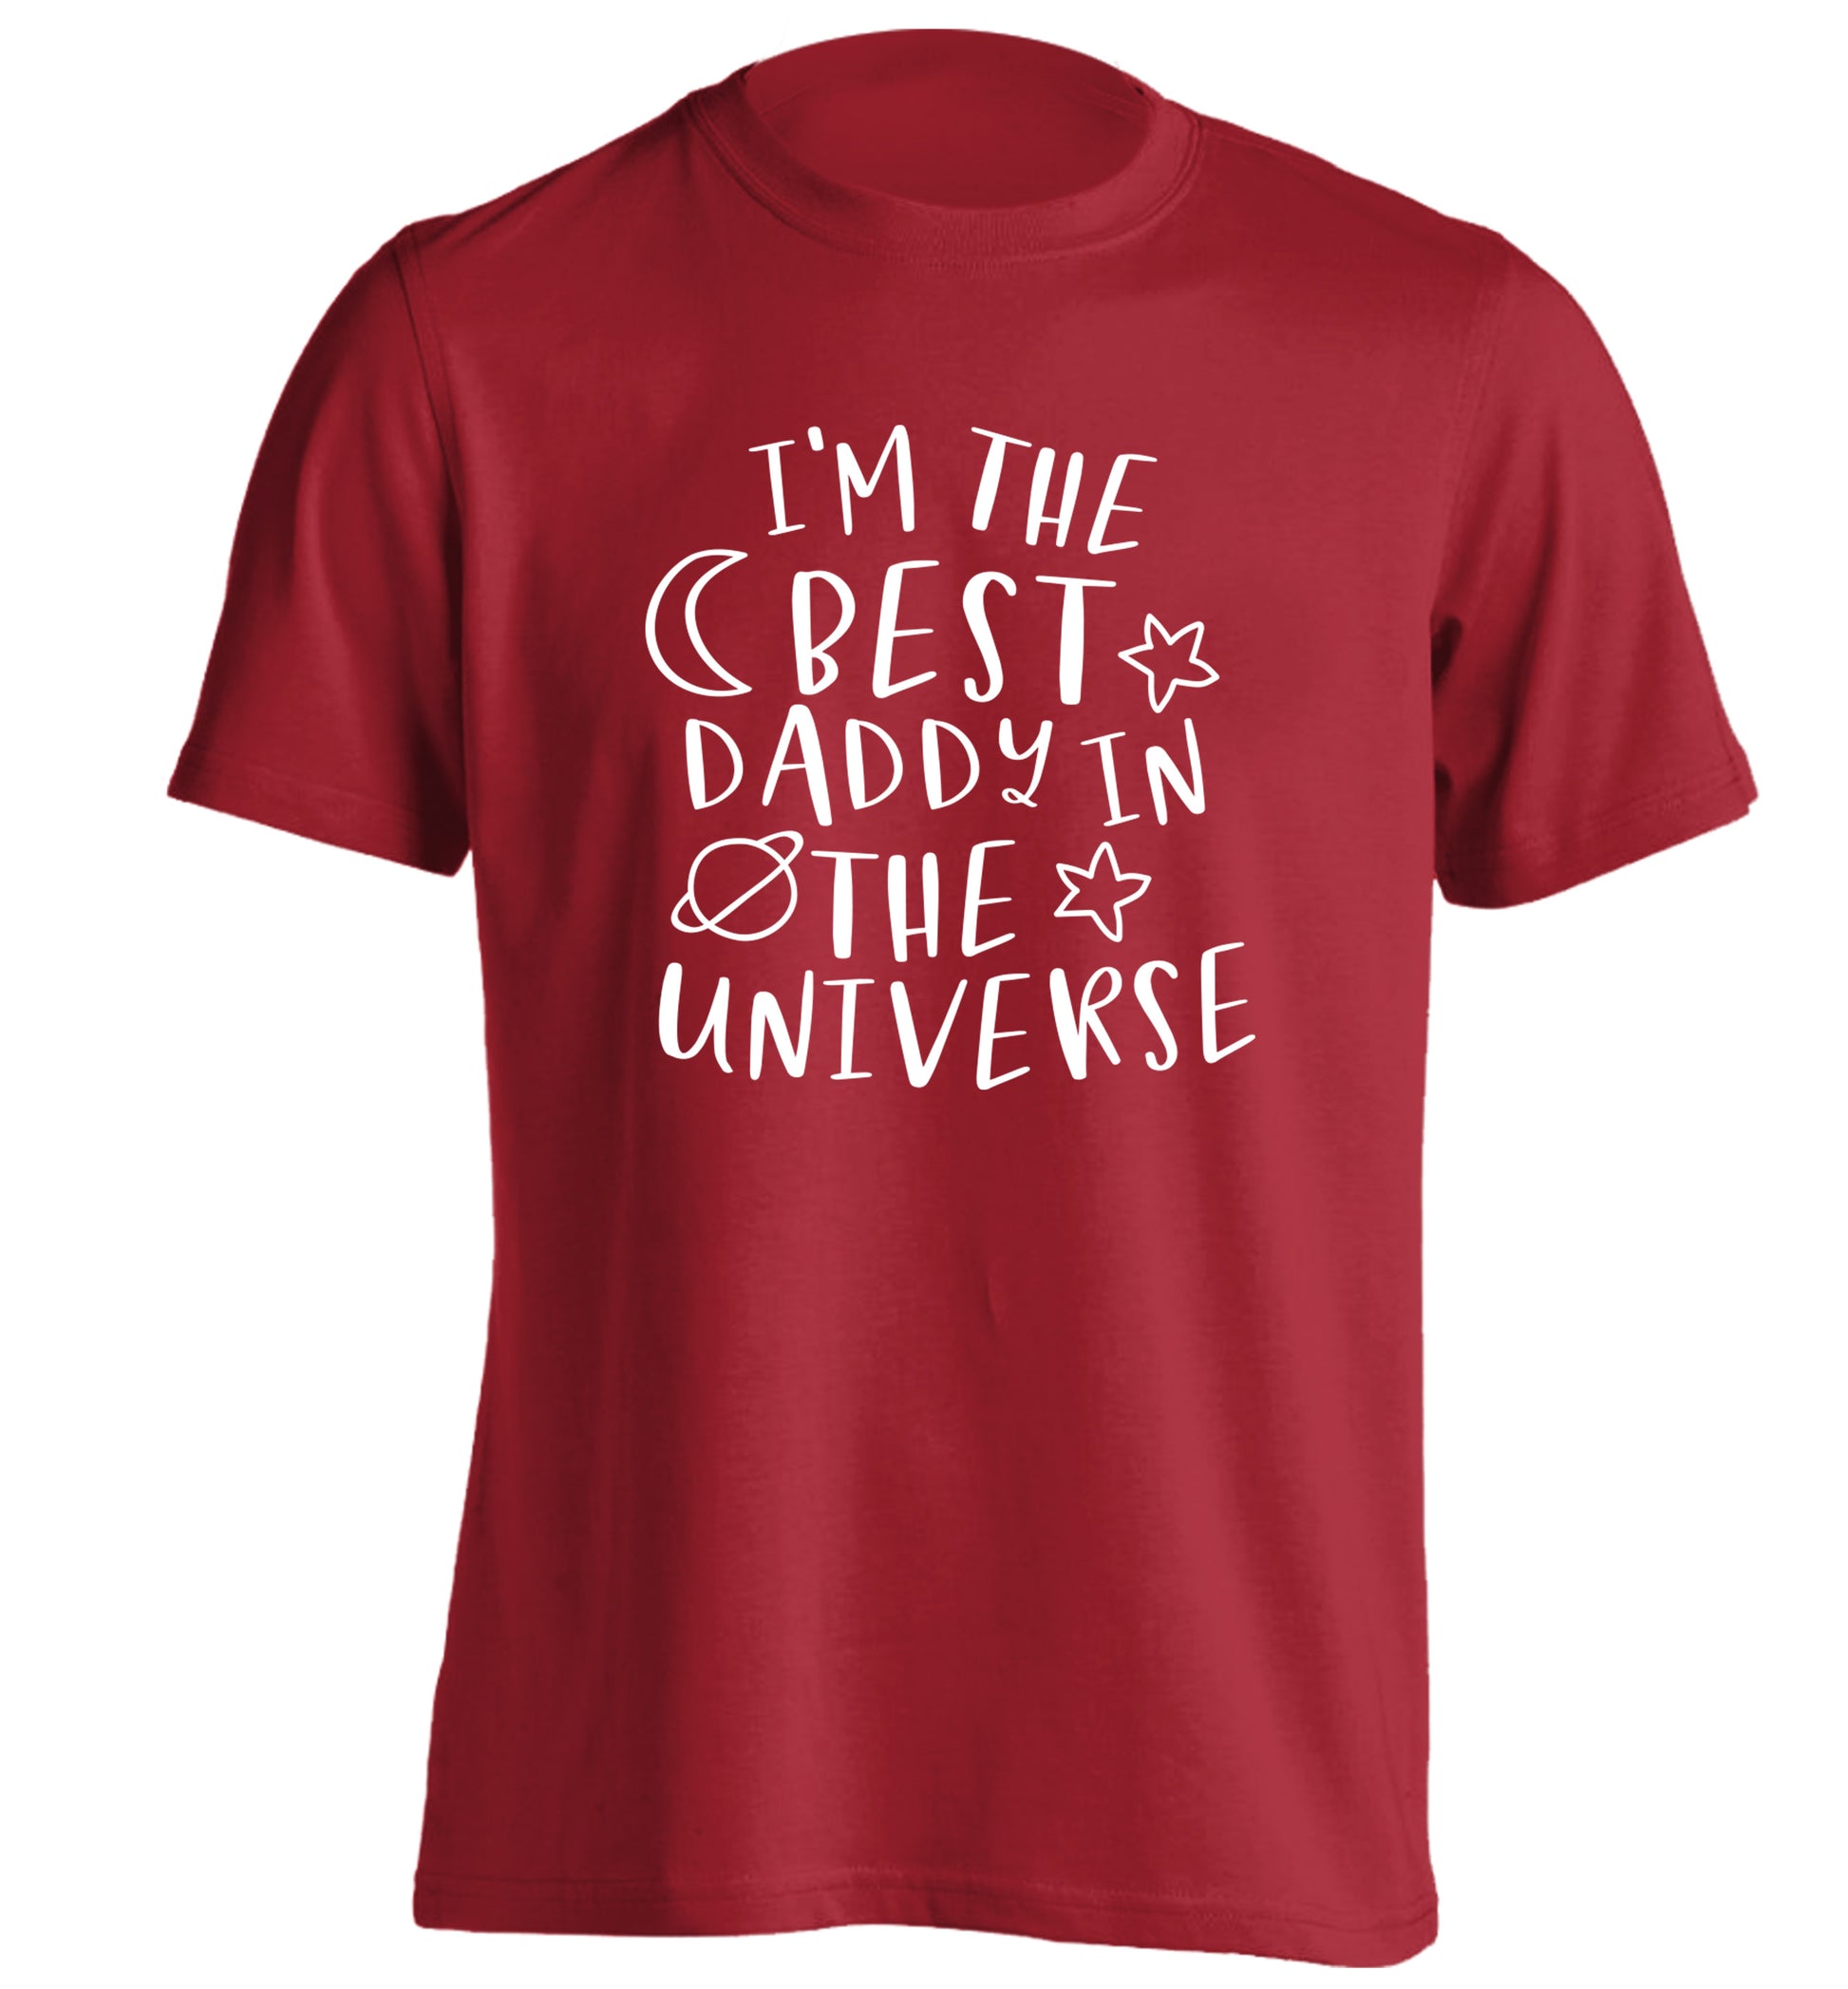 I'm the best daddy in the universe adults unisex red Tshirt 2XL